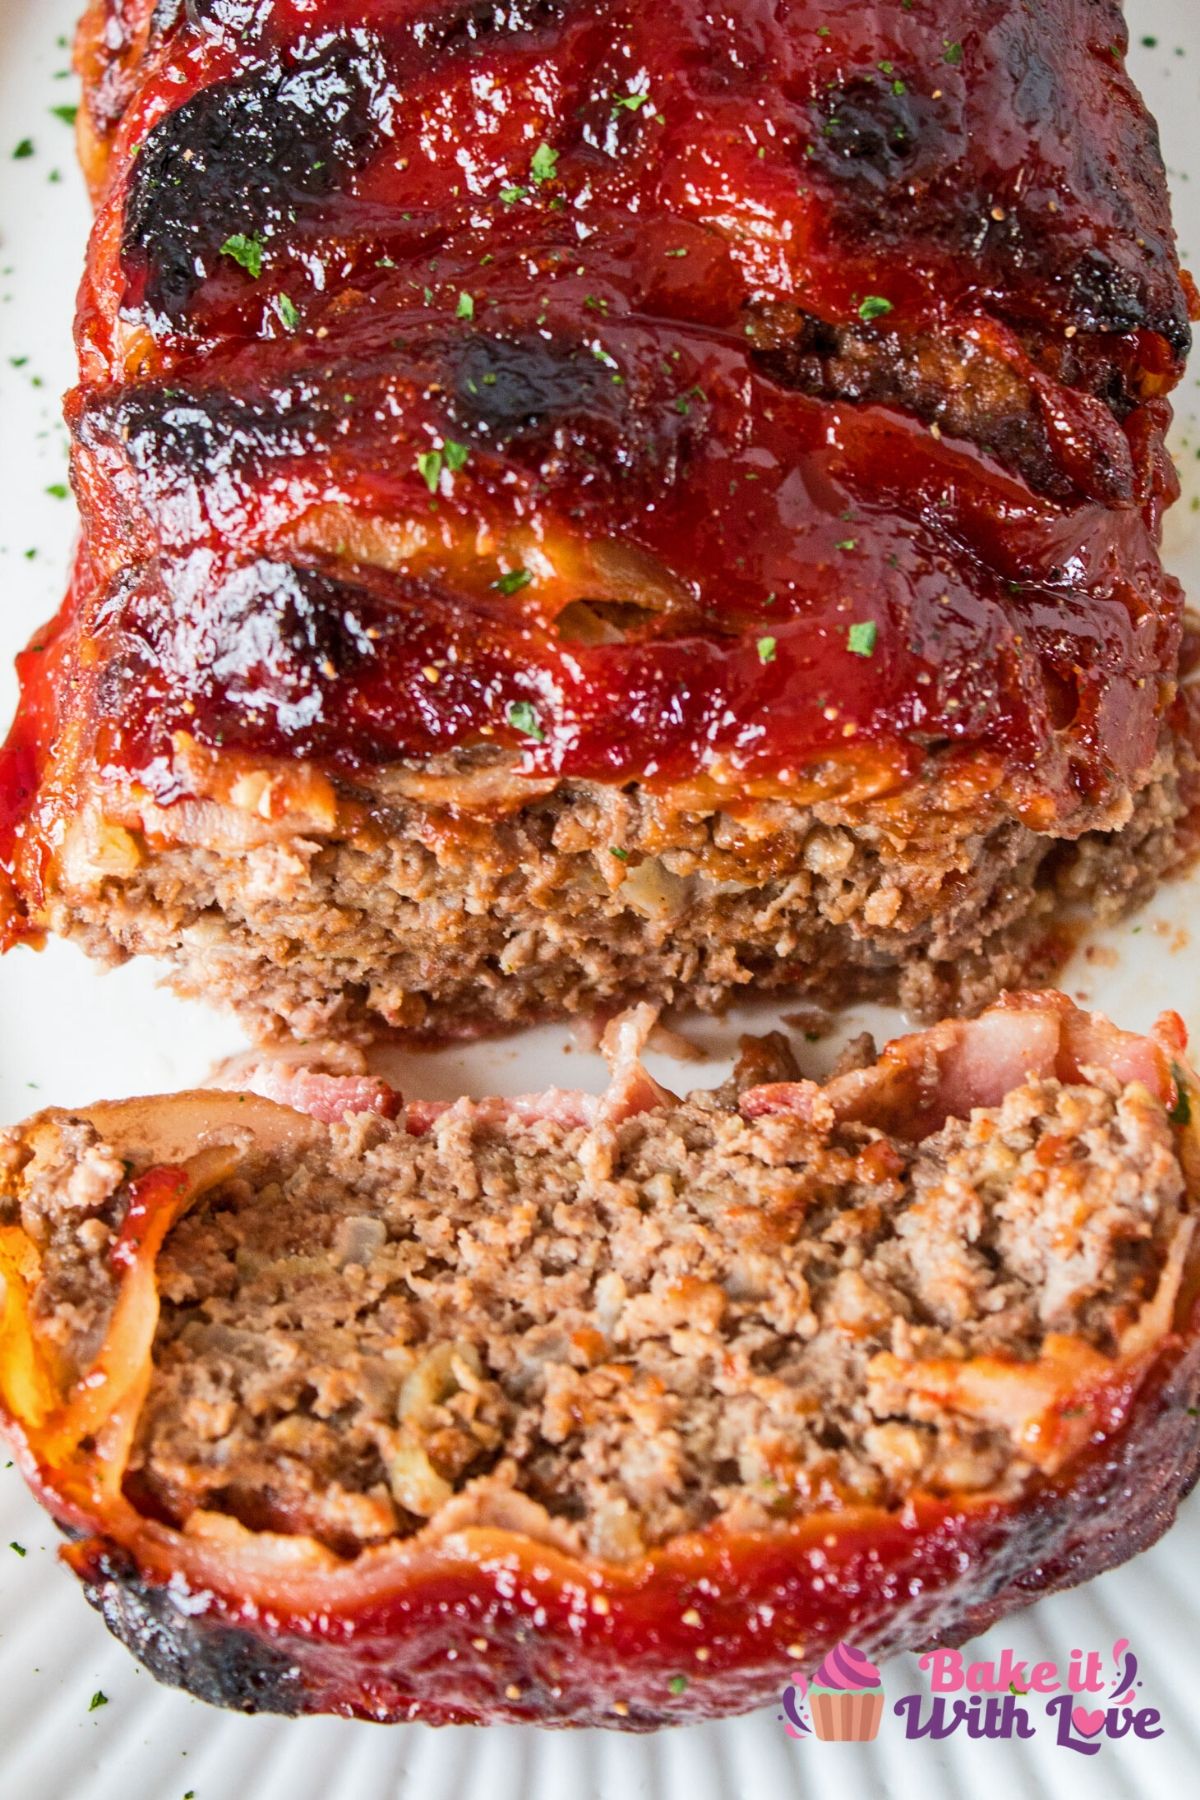 Delicious bacon wrapped meatloaf with a tangy ketchup sauce coating that is cooked to perfection!